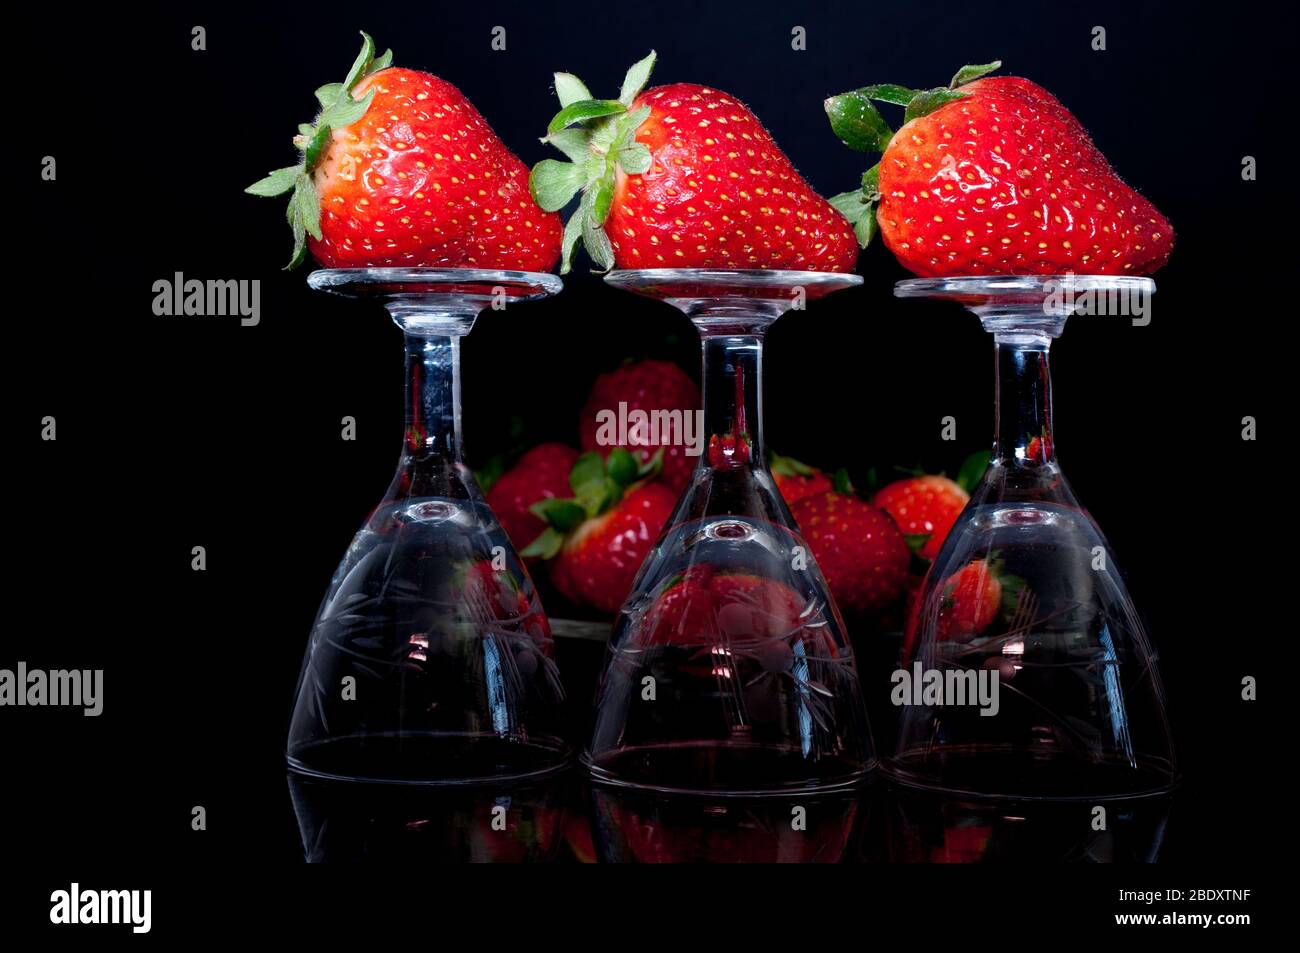 close-up of strawberrys on little decorated glasses on a dark background Stock Photo